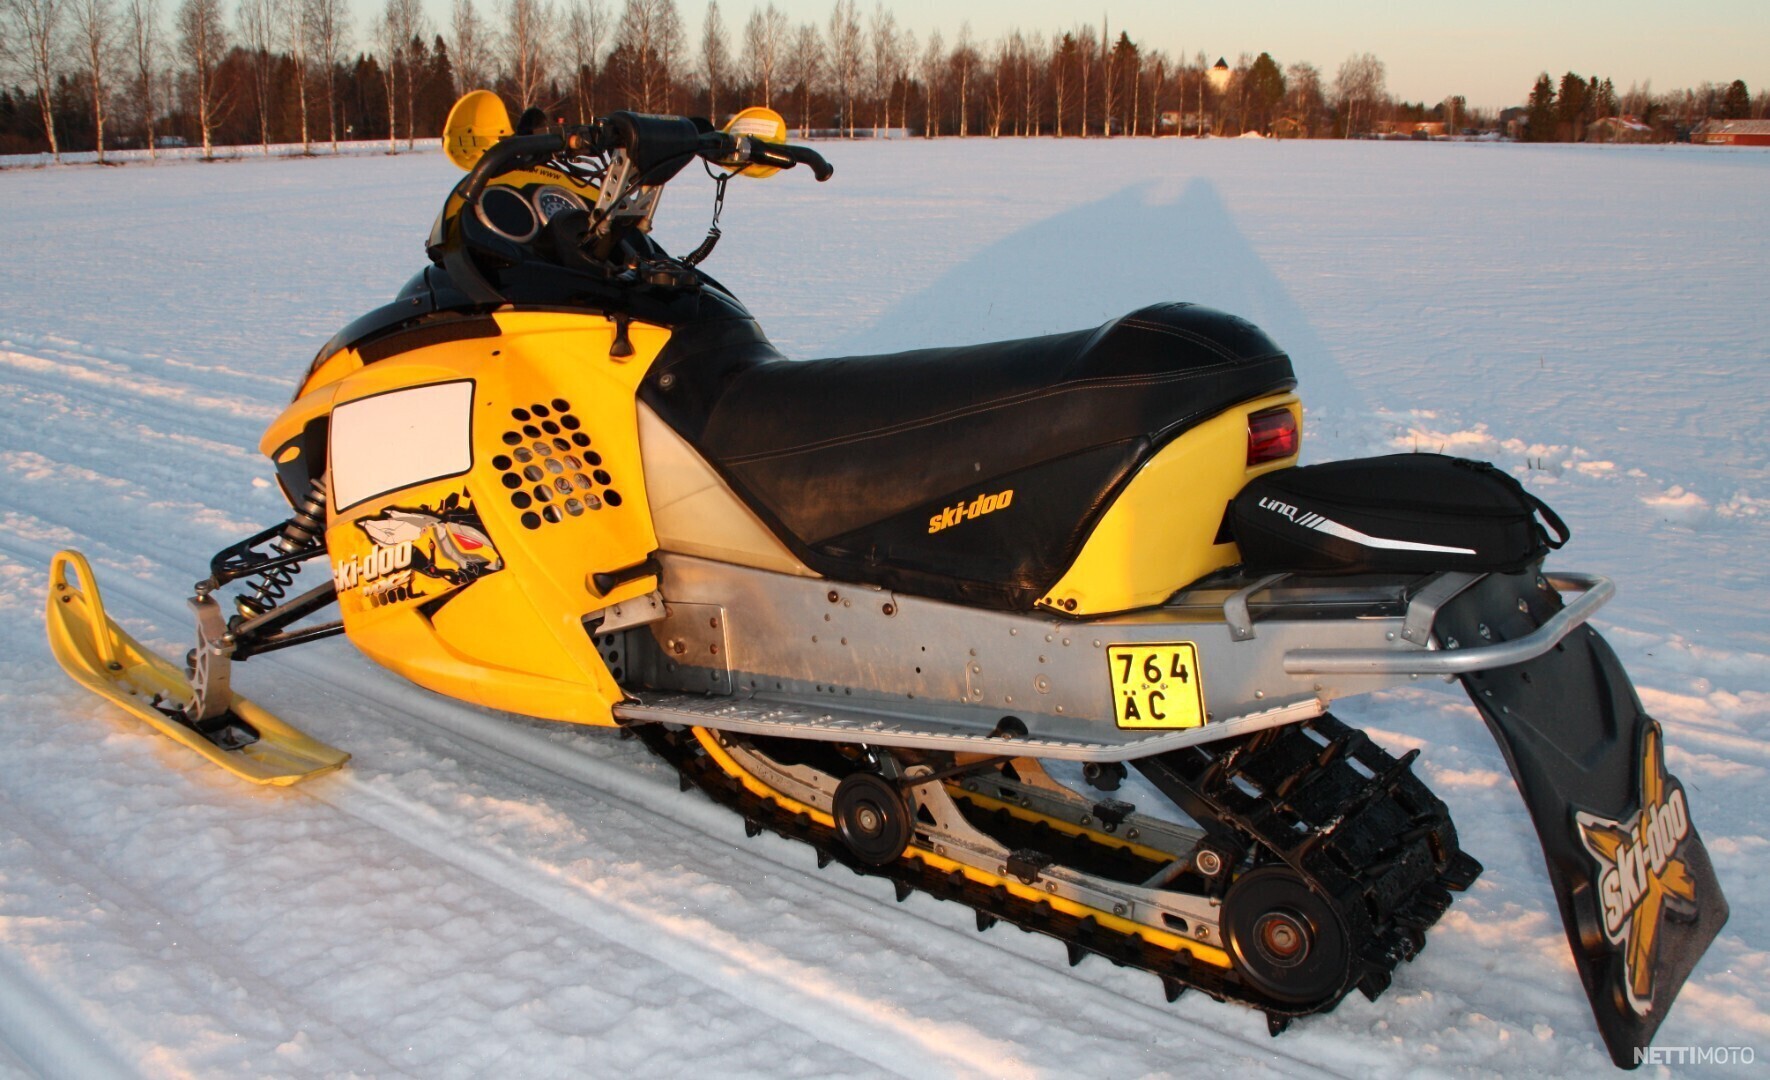 440 TRUNK Little One Not Big One For 07 Ski-Doo Snowmobiles, 47% OFF